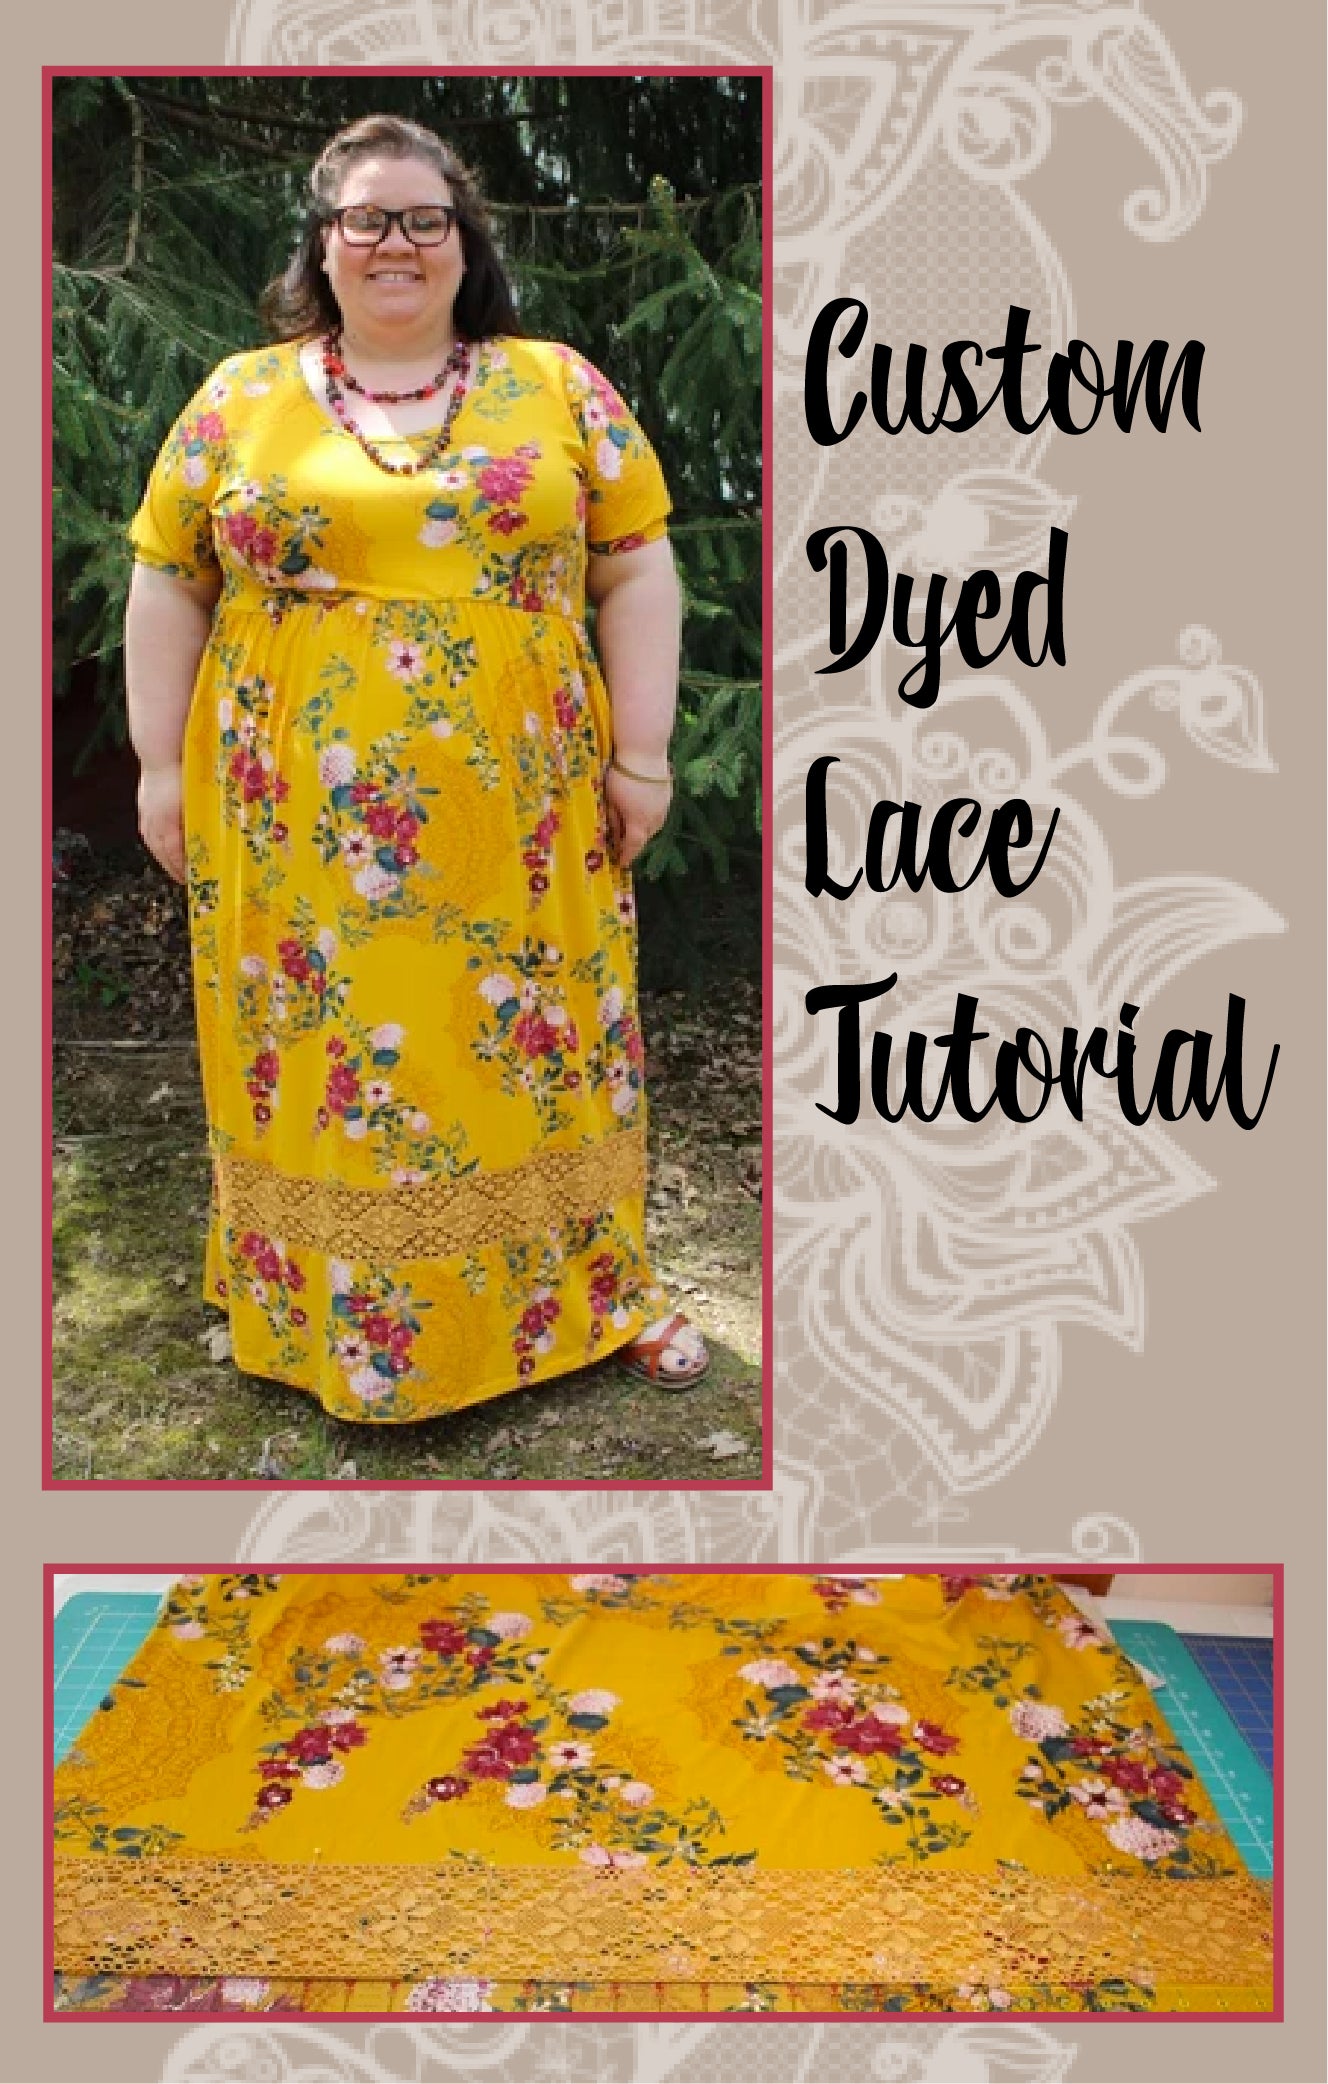 How to Hand Dye Lace